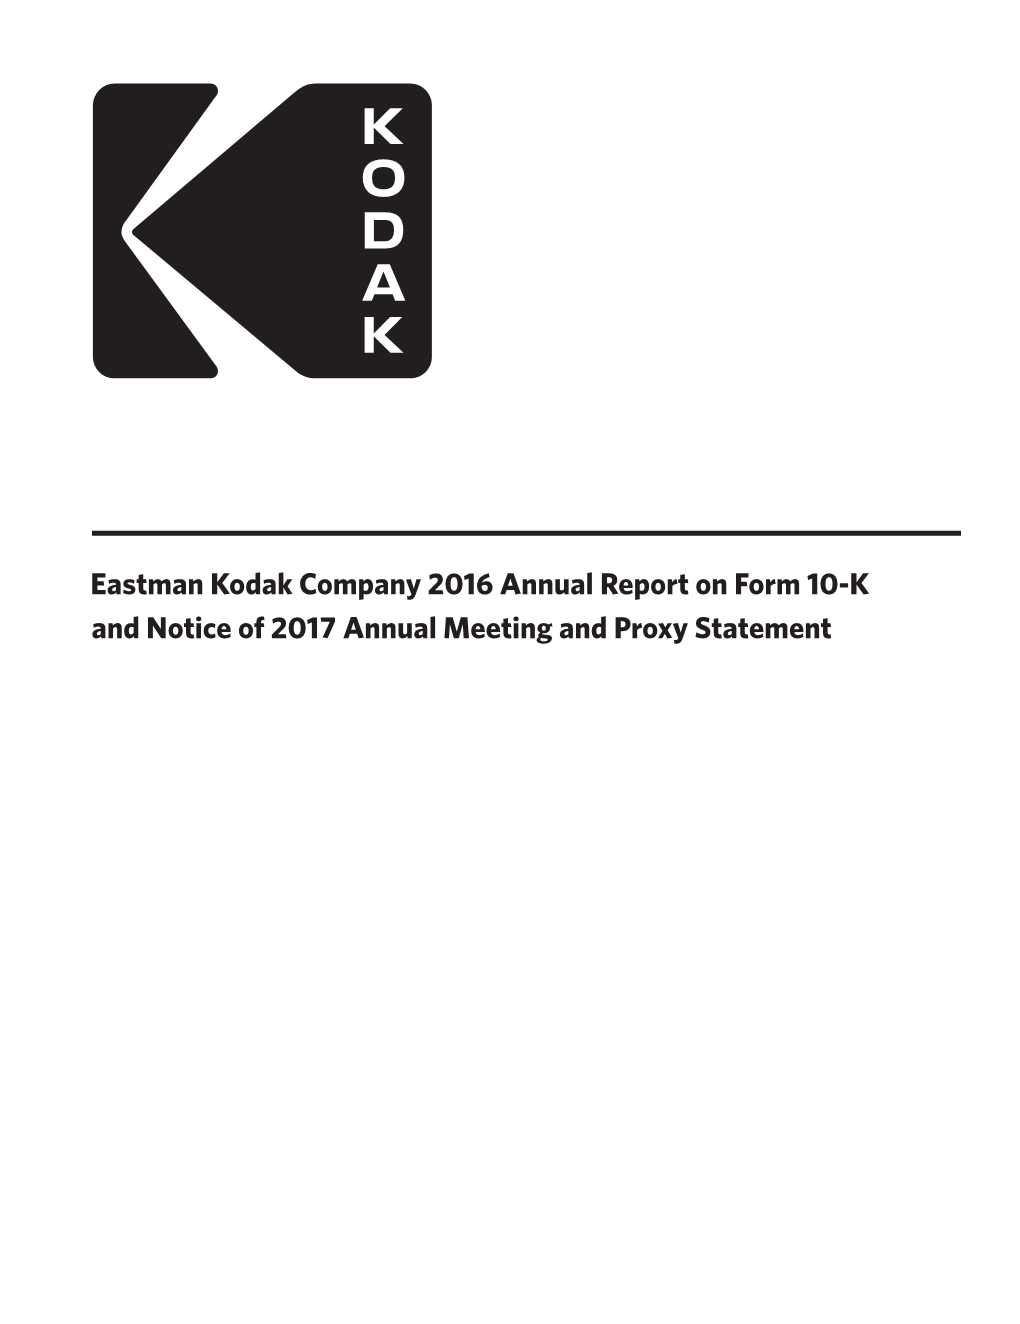 Eastman Kodak Company 2016 Annual Report on Form 10-K and Notice of 2017 Annual Meeting and Proxy Statement � SECURITIES and EXCHANGE COMMISSION Washington, D.C